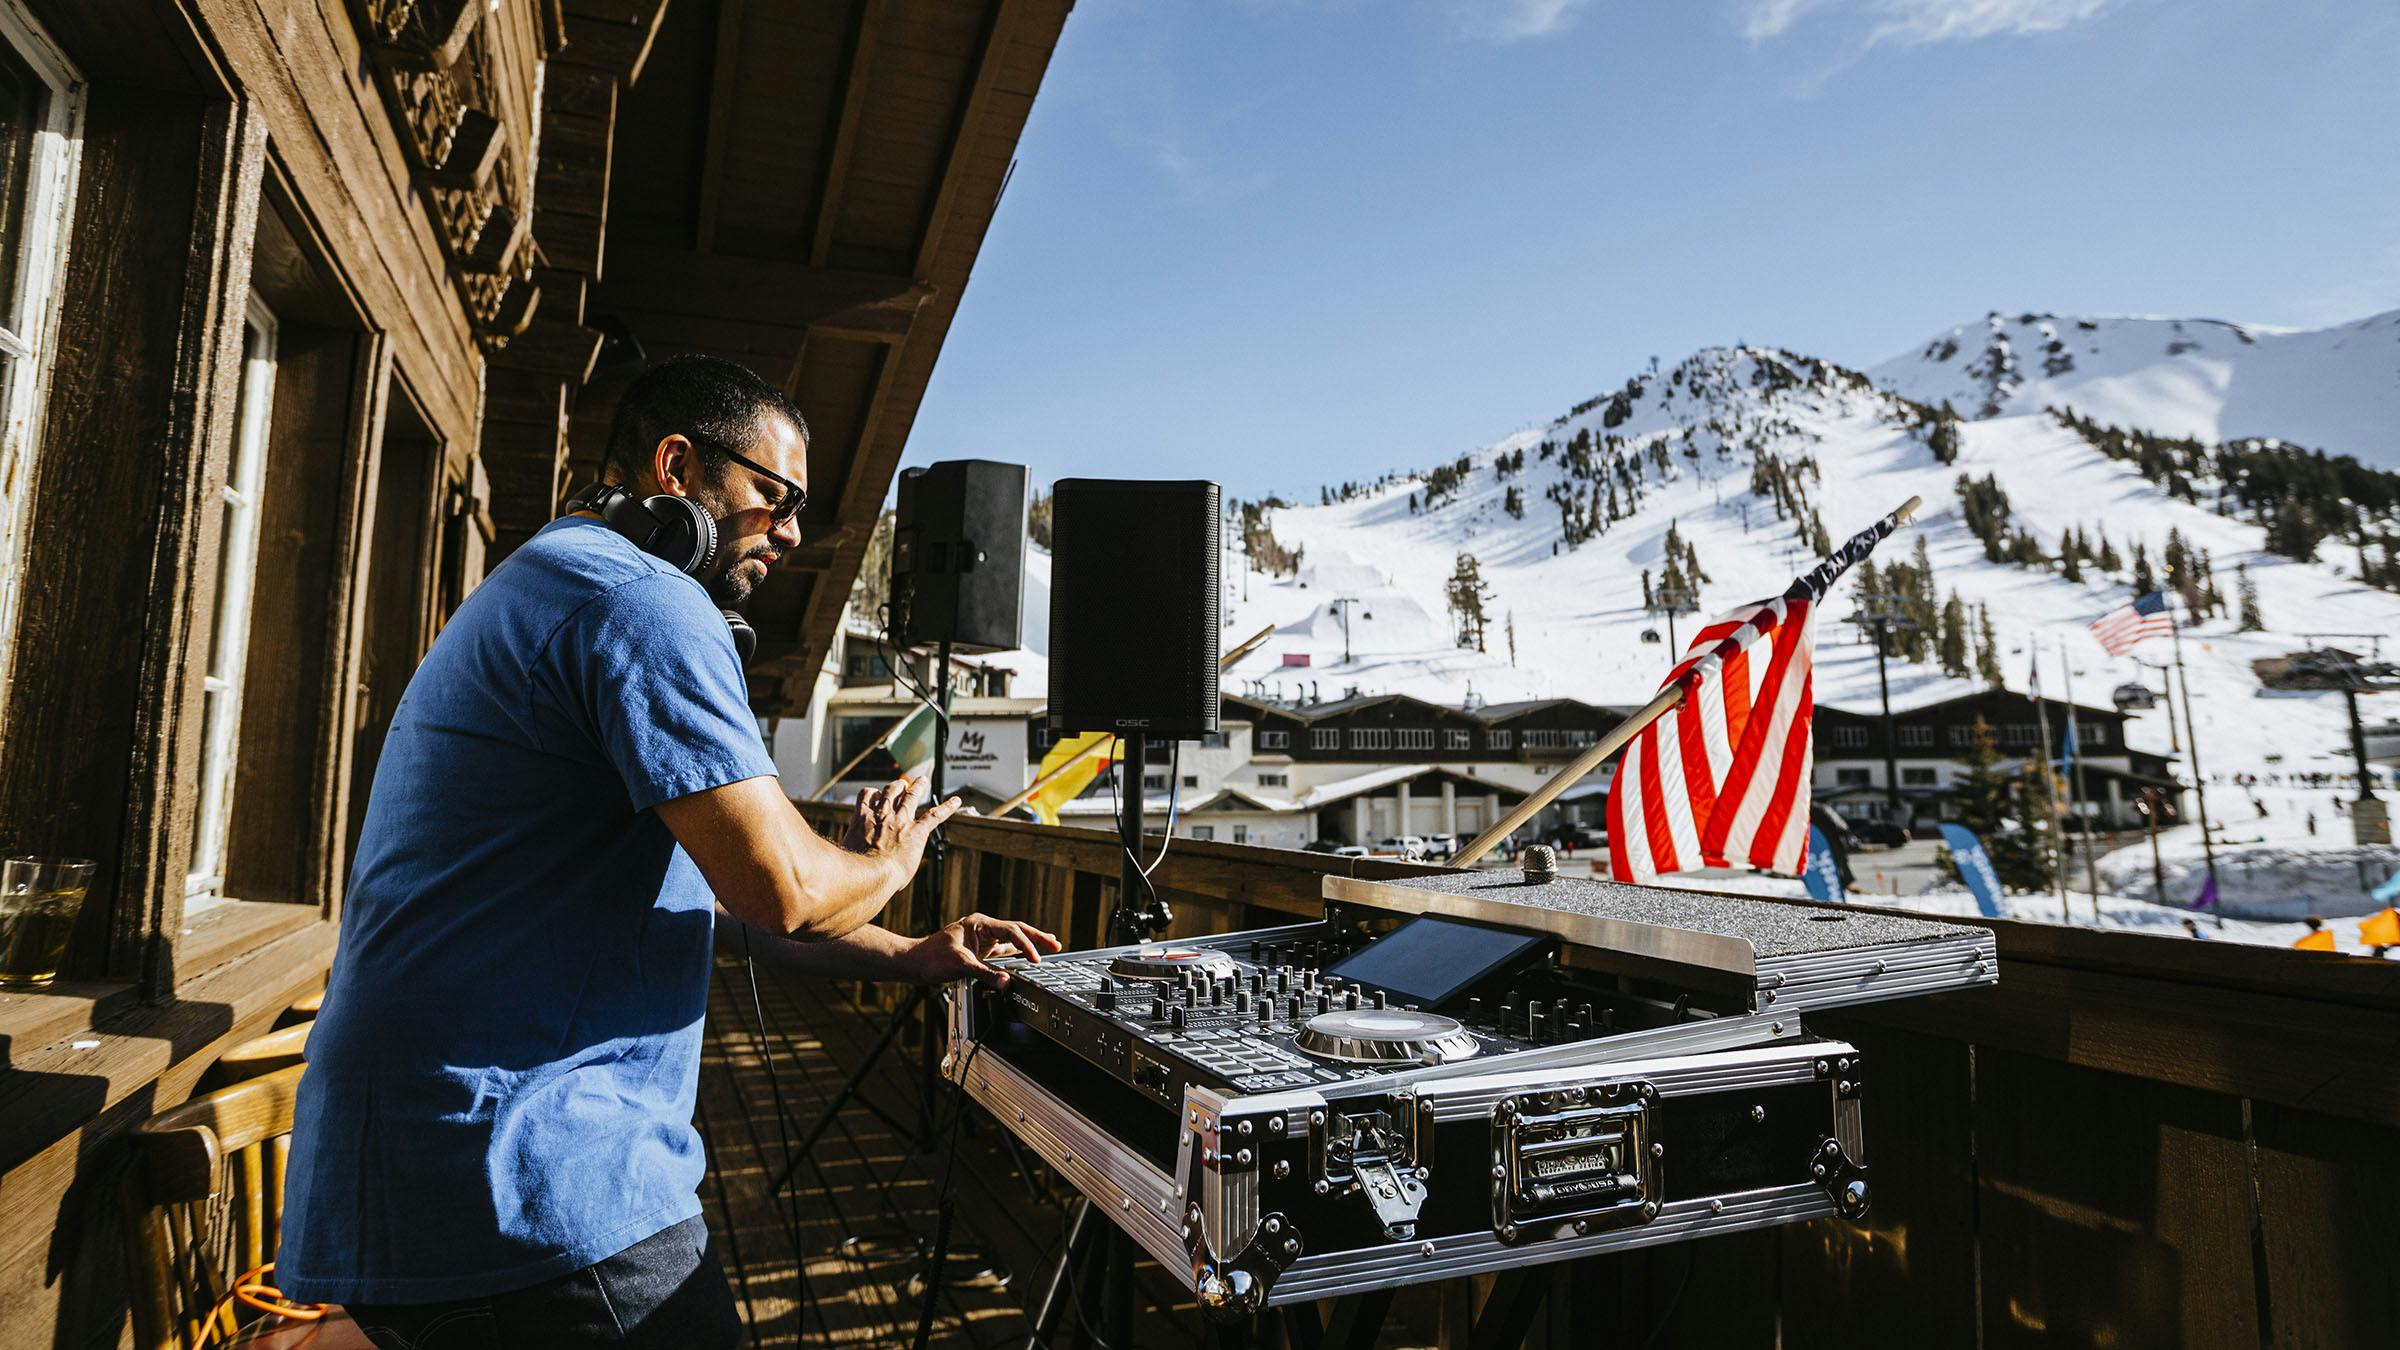 DJ at the Yodler Restaurant & Bar with Mammoth Mountain in the background